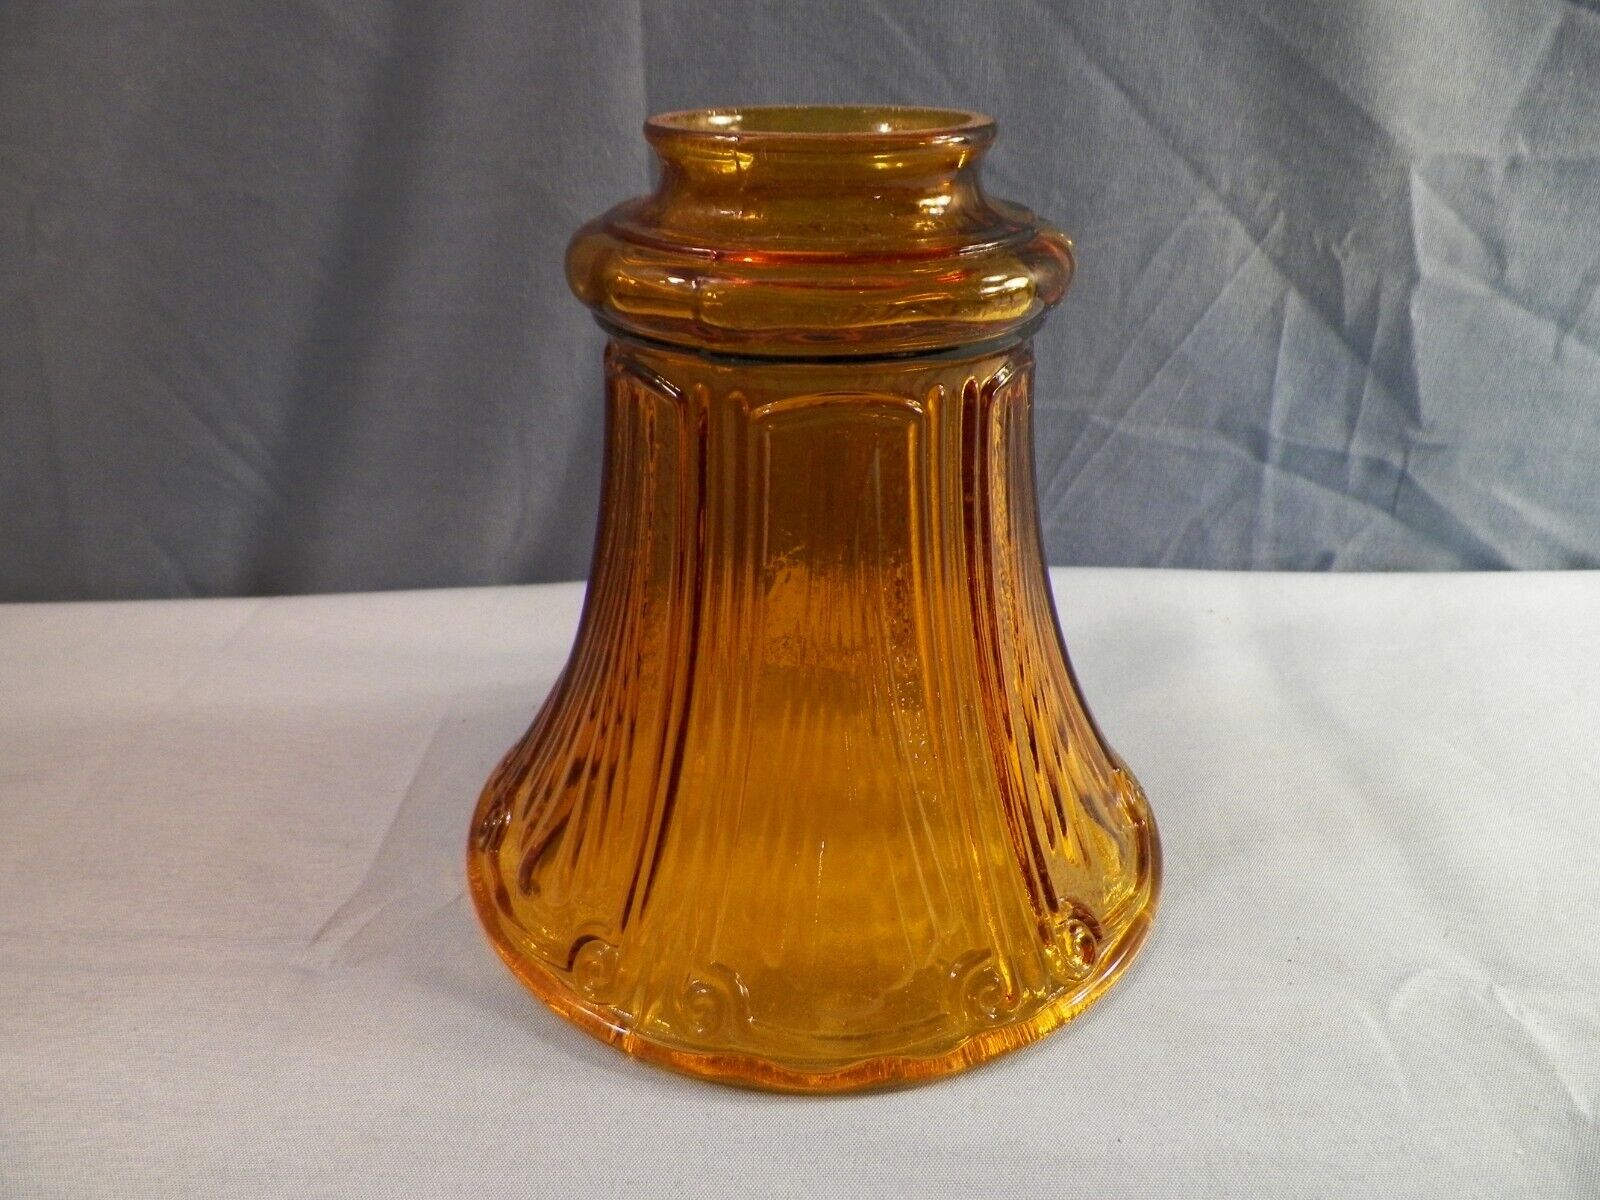 Amber Glass Ceiling Light Fixture Fan Lamp Shade Ribbed Scroll Design